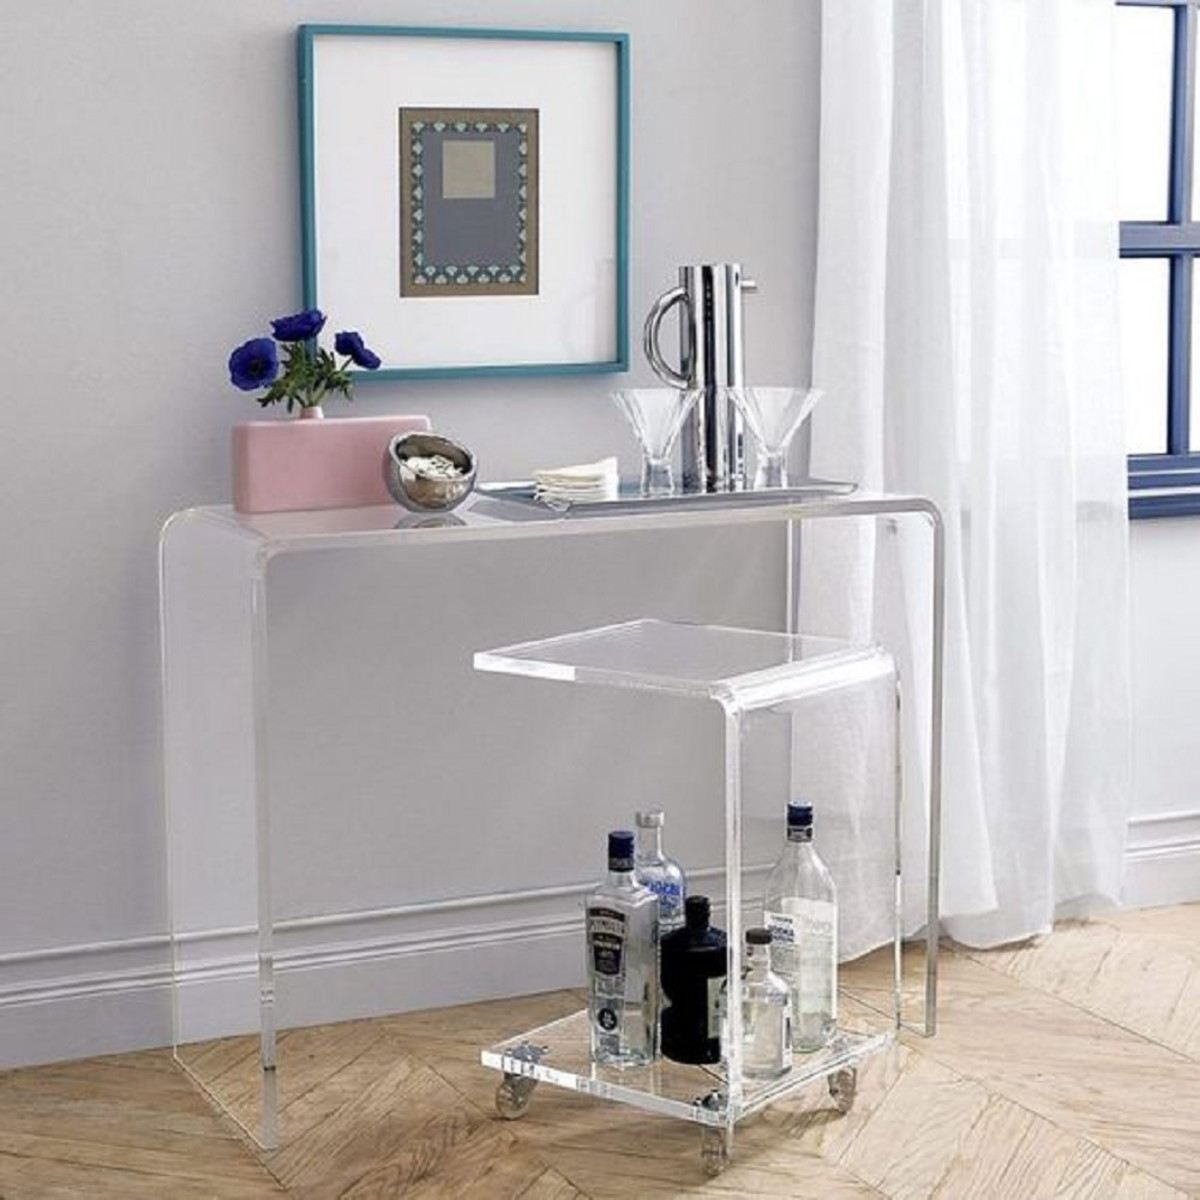 Transparent Furniture 2 8 Simple Tips to Choose Best Furniture for Small Spaces - 27